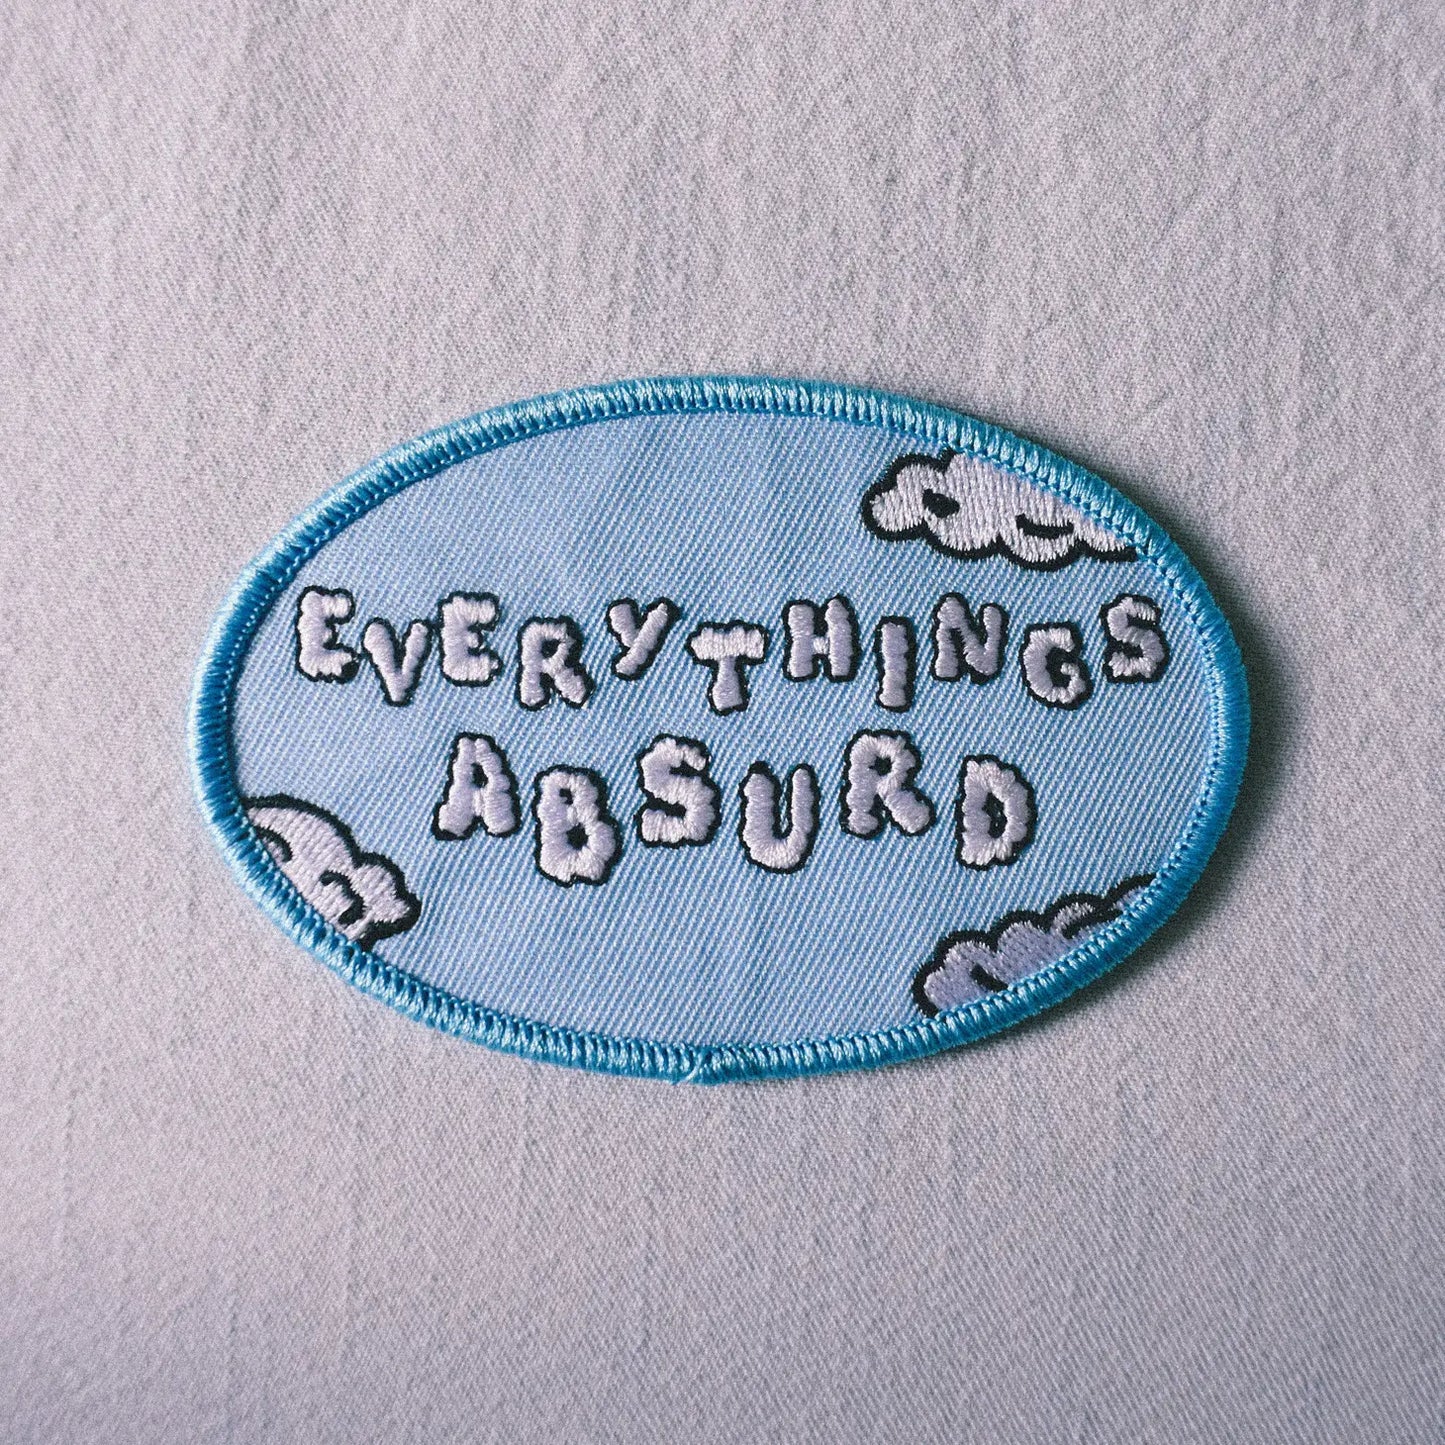 Everythings Absurd Patch